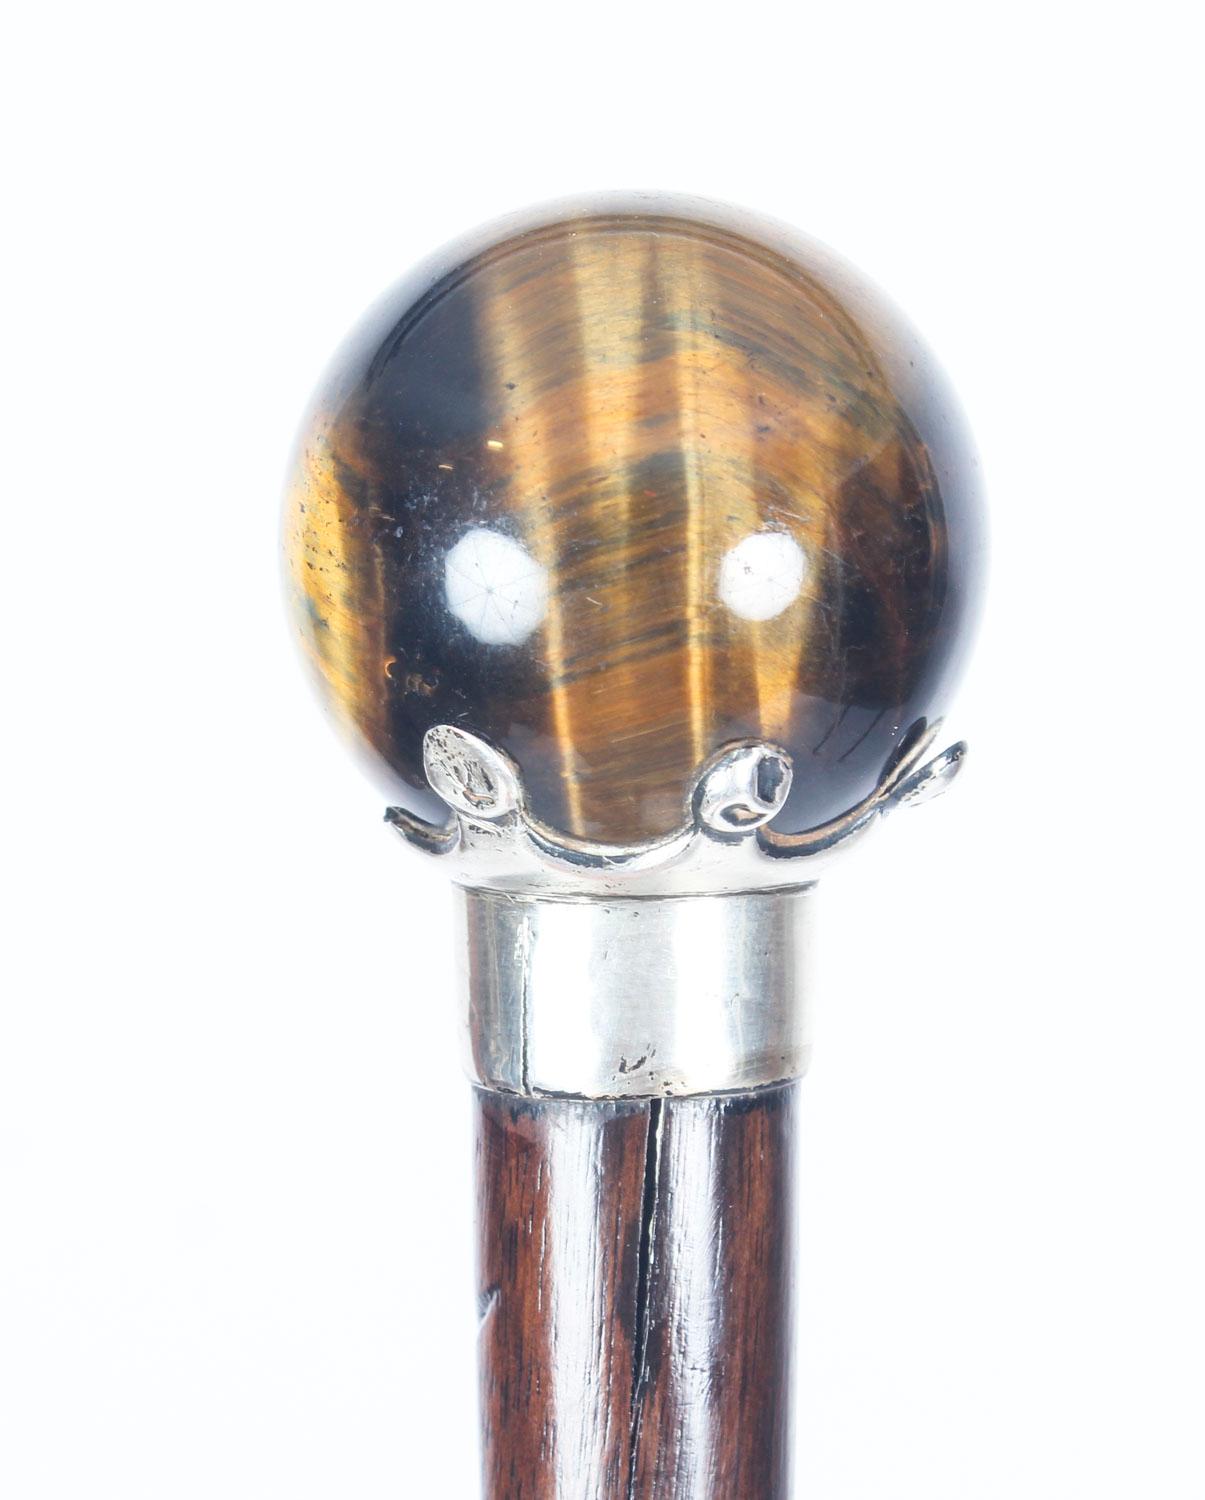 This is a marvellous, antique gentleman's cane with a sphere tigers eye handle and a sterling silver collar with rubbed marks, late 19th century in date.

The Malacca shaft is complete with its original bi-metal ferrule.

Add this useful